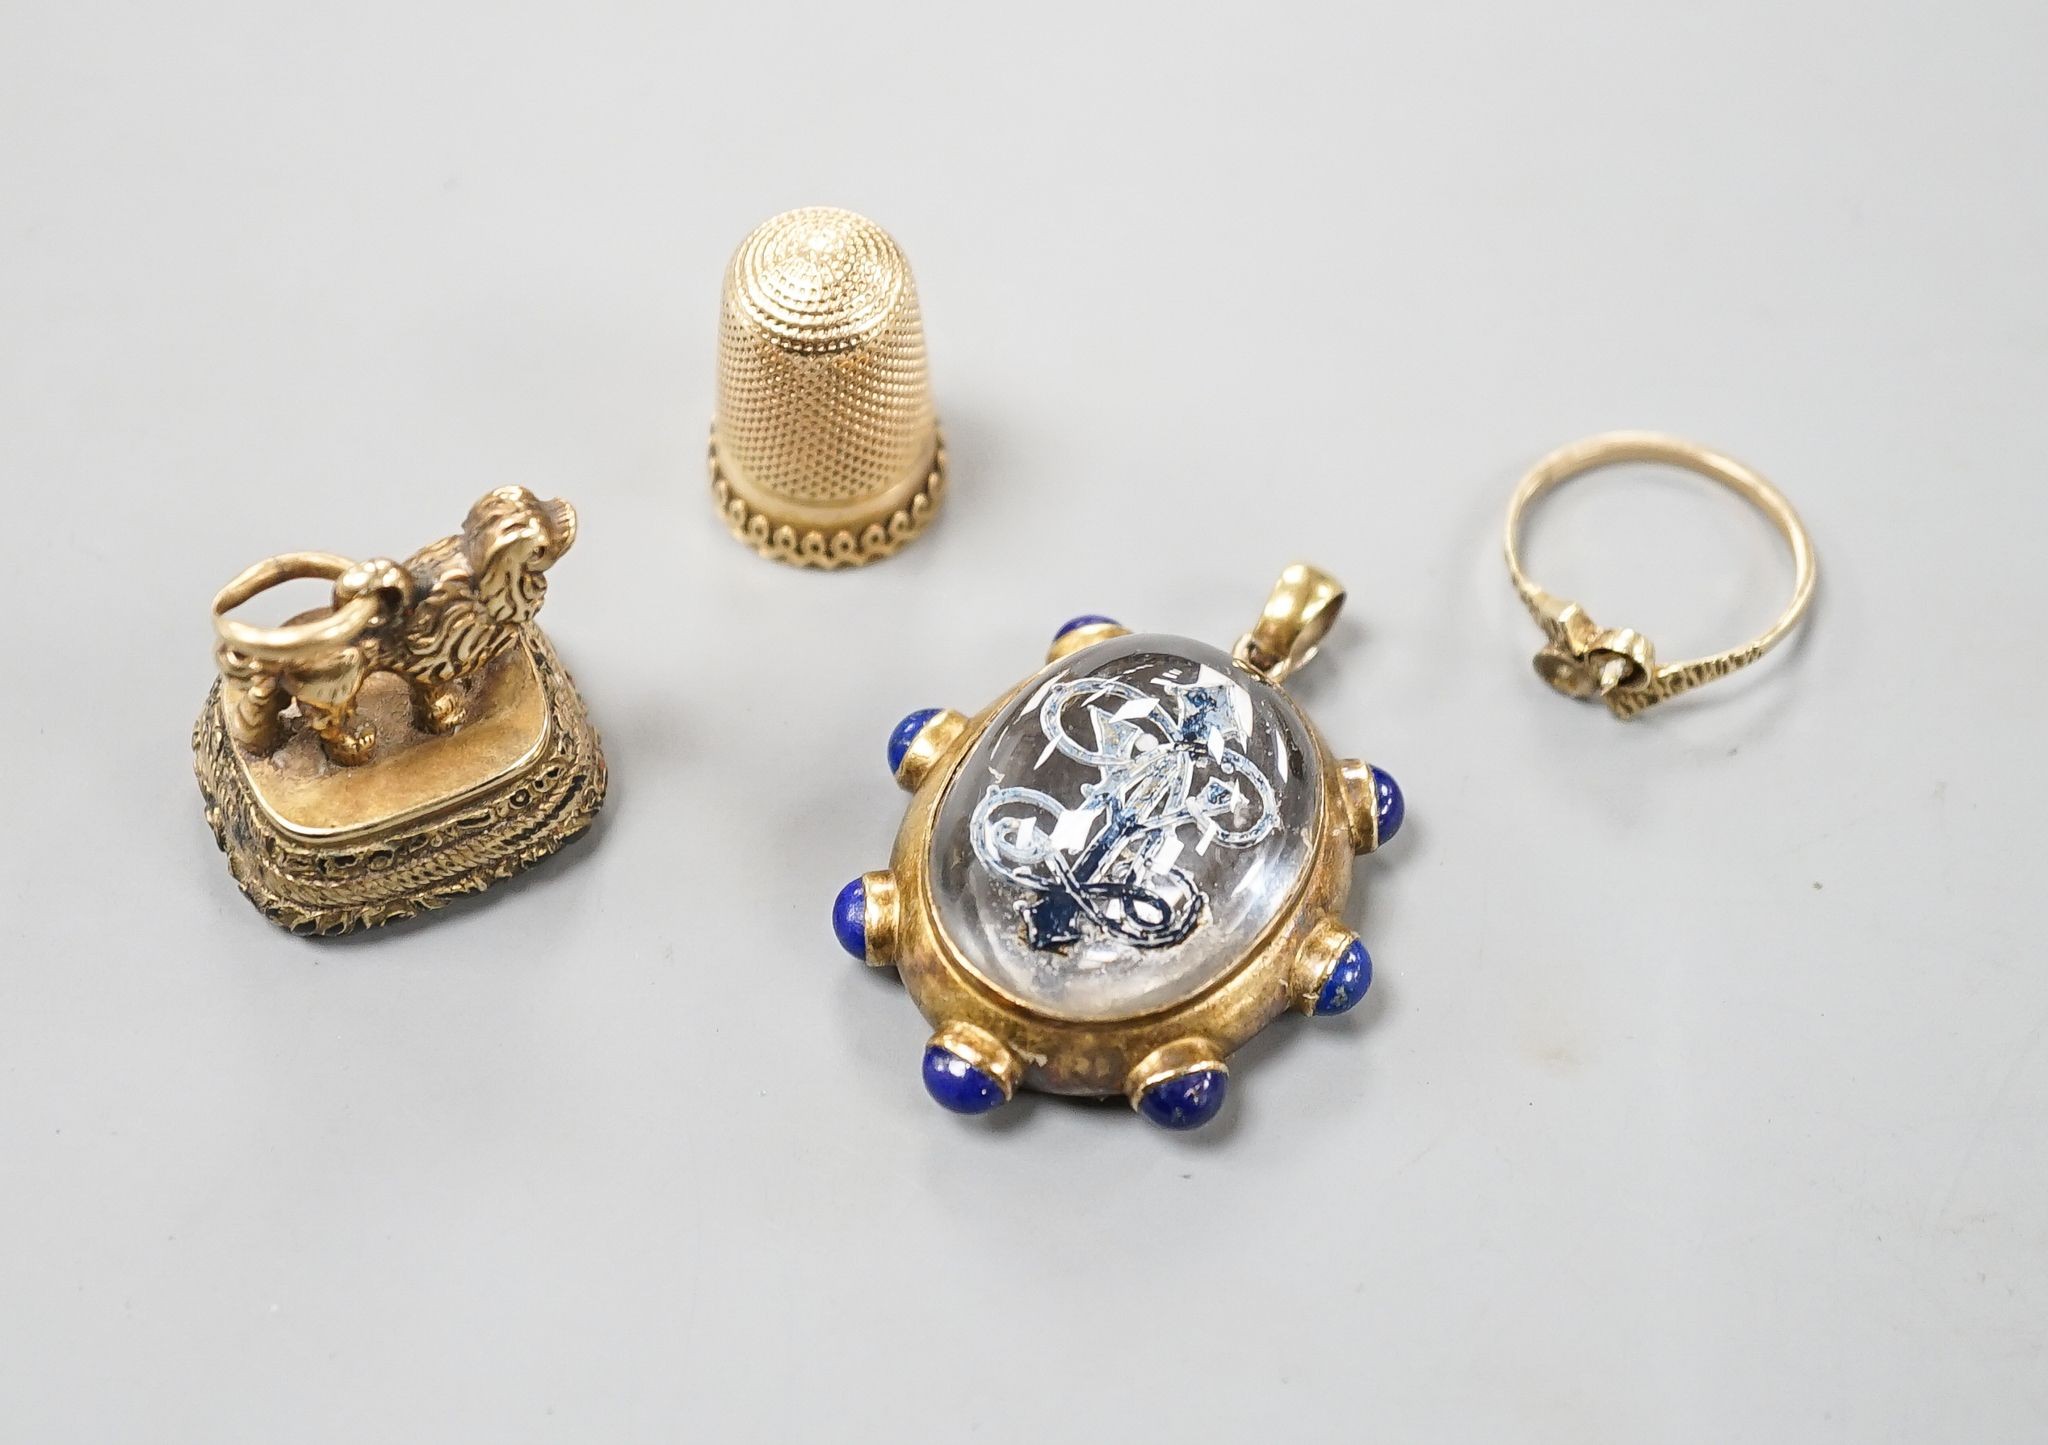 A yellow metal thimble, a 19th century yellow metal overlaid and carnelian set fob seal with poodle surmount, pendant and 9ct gold shank.